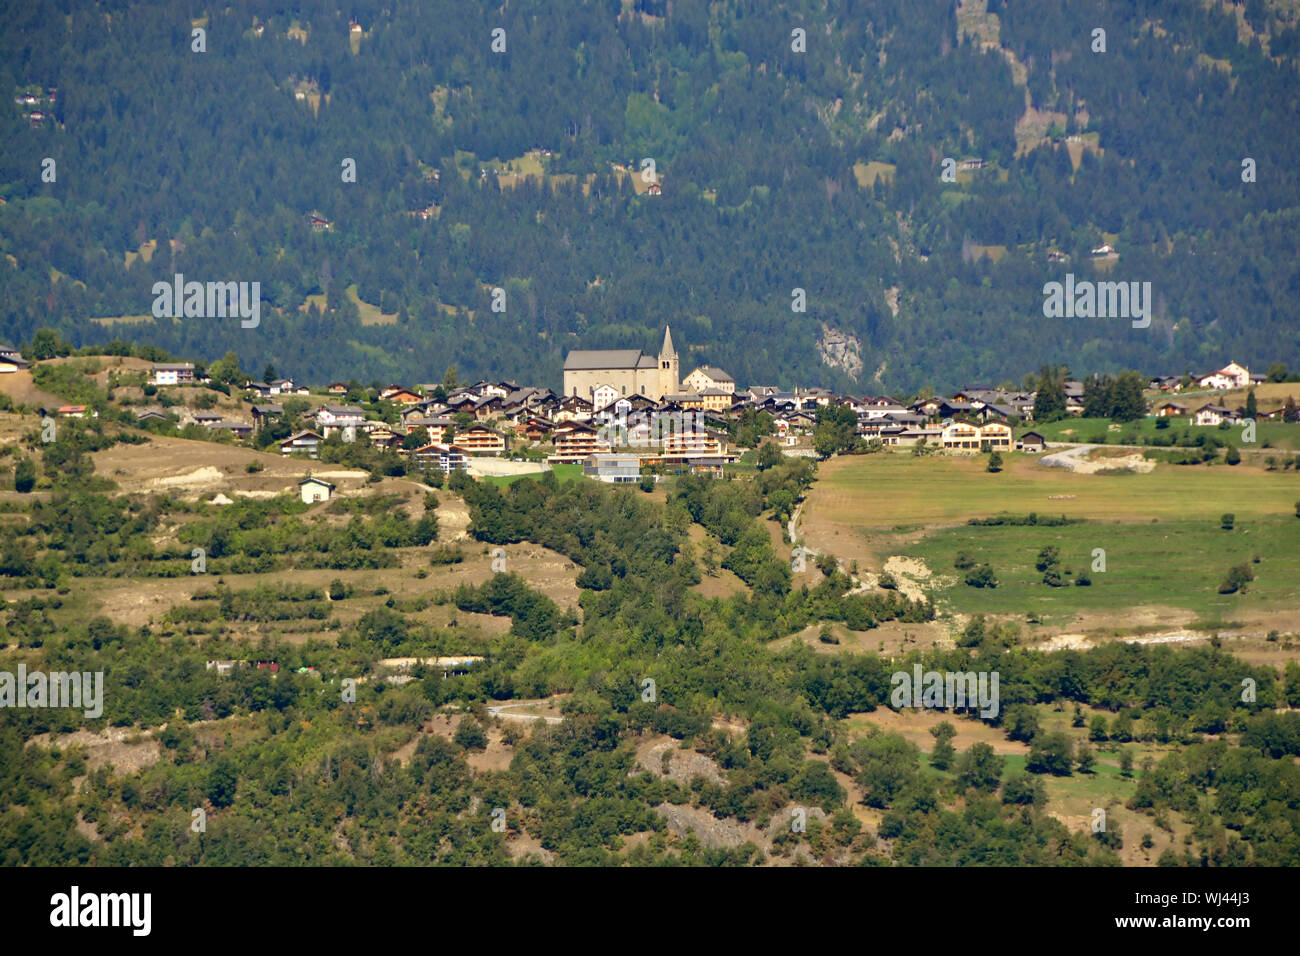 The Mountain Village of Lens in the Valais canton of Switzerland perched on a ridge Stock Photo